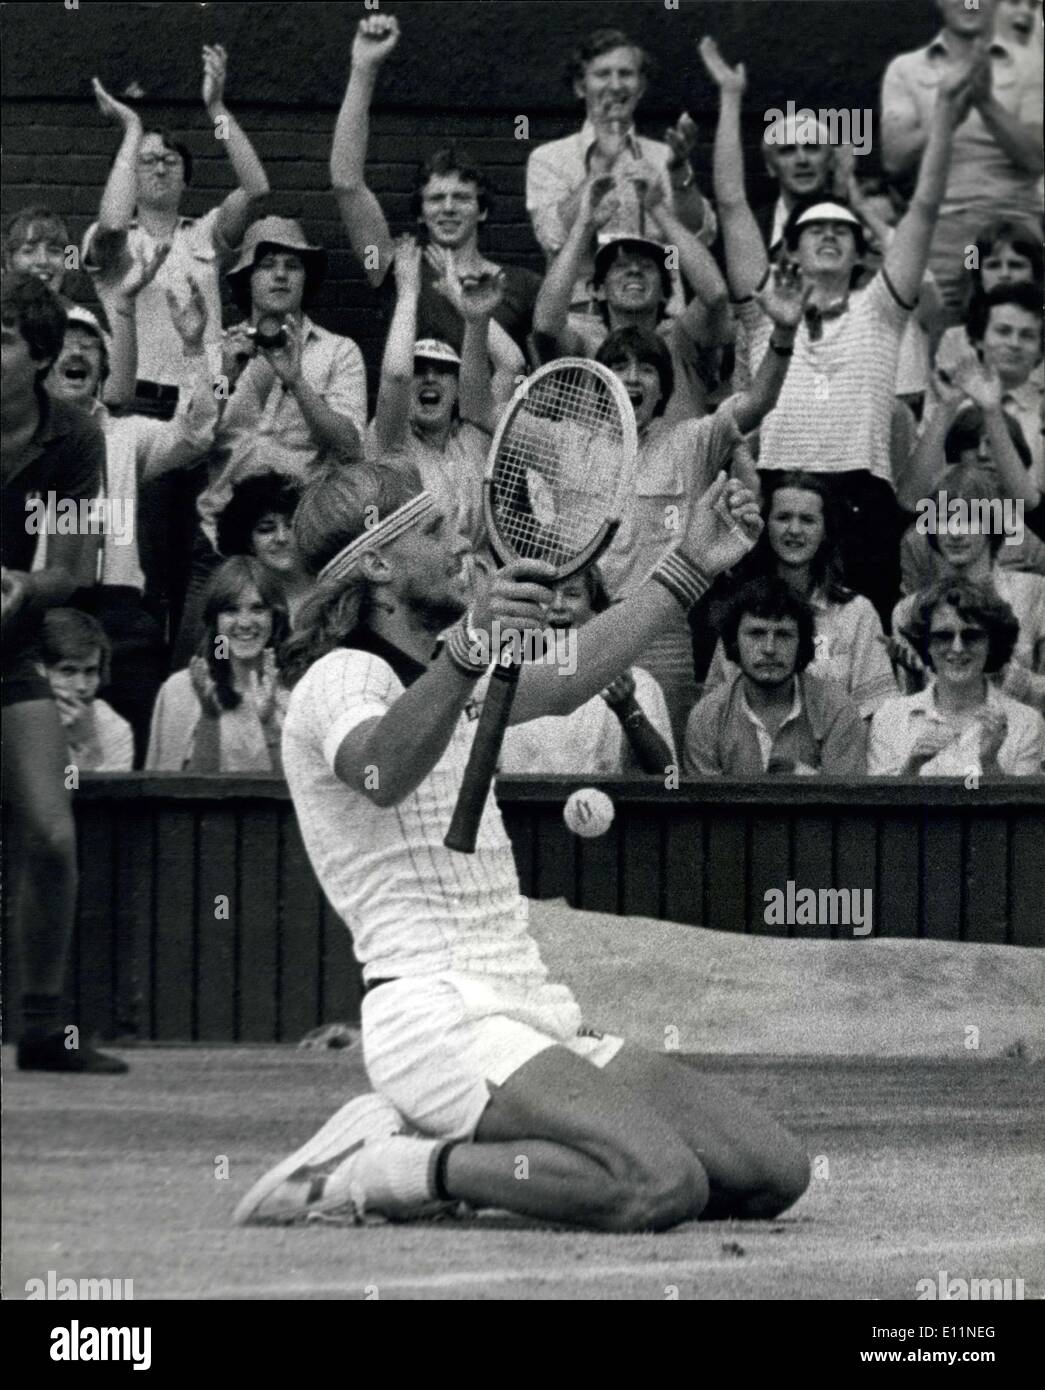 Jul. 07, 1979 - Bjorn Borg wins Wimbledon for the fourth time in a row: Today of the Centre Court at Wimbledon Bjorn Borg of Sweden won the Men's Singles title for the fourth Seccessive time when he beat the American Roscoe Tanner in five sets. Photo shows Borg falls to his knees with his arms in the air after beating Roscoe Tanner. Stock Photo